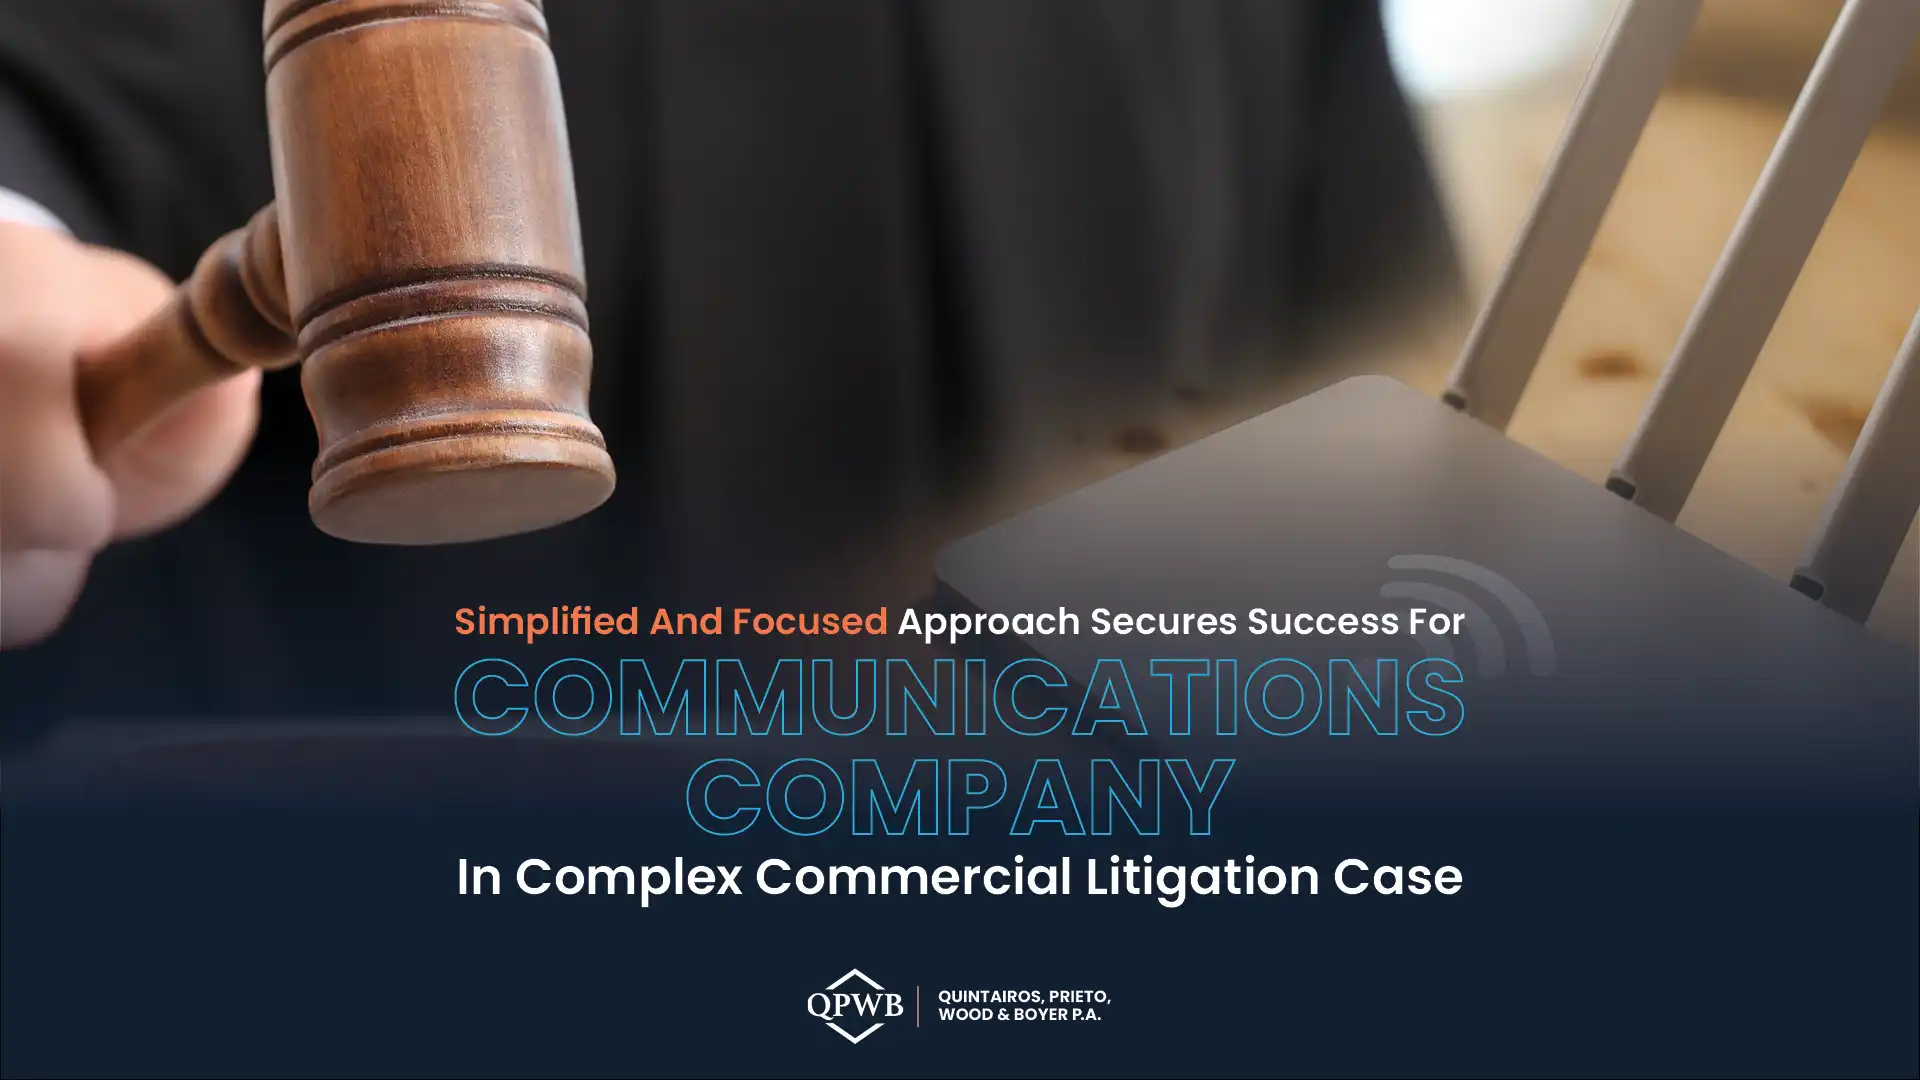 Simplified and Focused Approach Secures Success for Telecommunications Company in Complex Commercial Litigation Suit and Countersuit